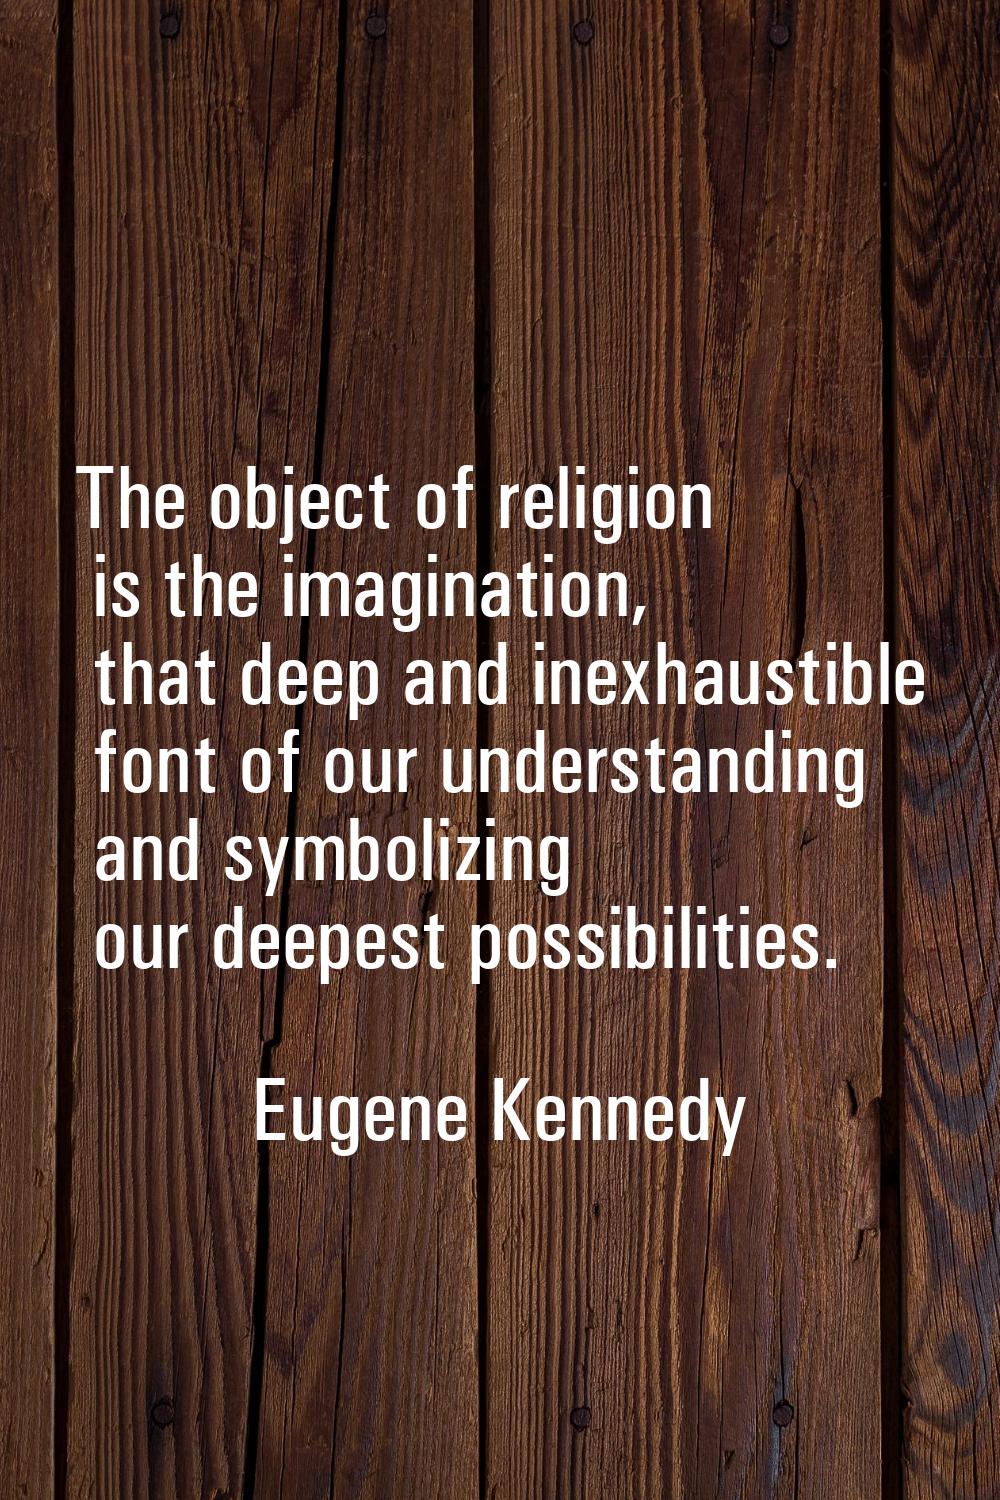 The object of religion is the imagination, that deep and inexhaustible font of our understanding an